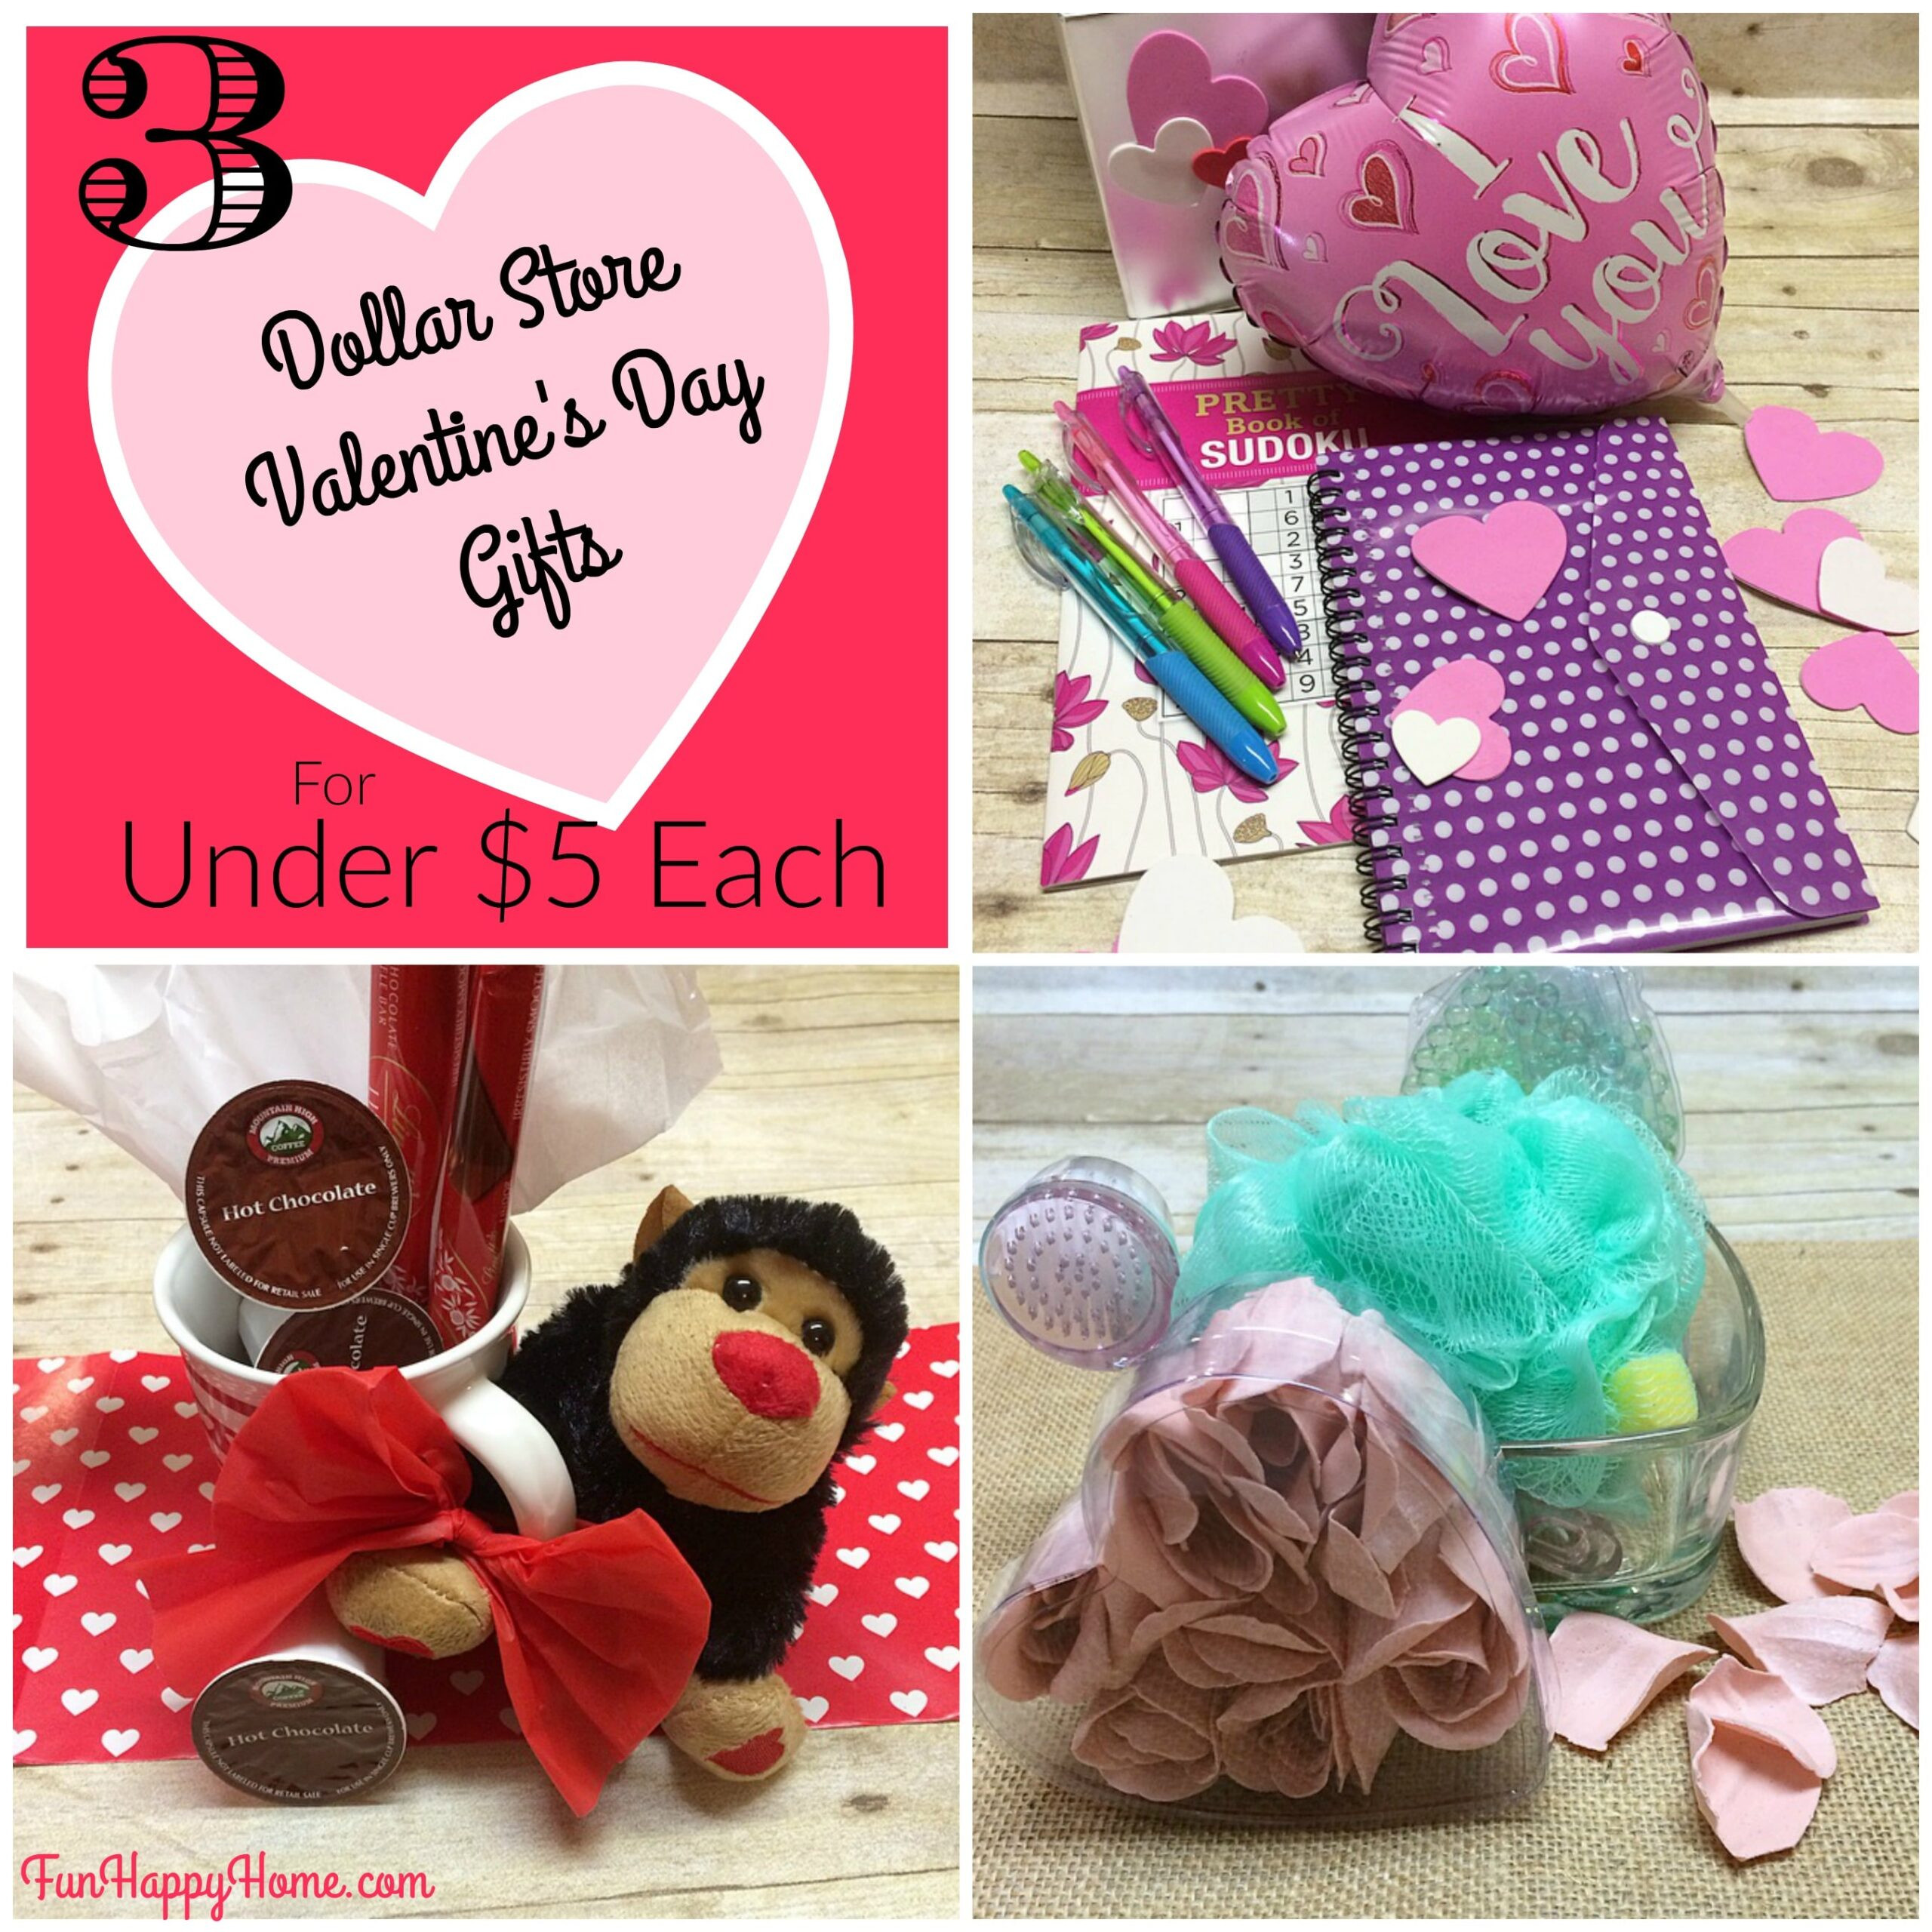 Good Valentines Gift Ideas
 3 Easy Dollar Store Valentine s Day Gifts Fun Happy Home